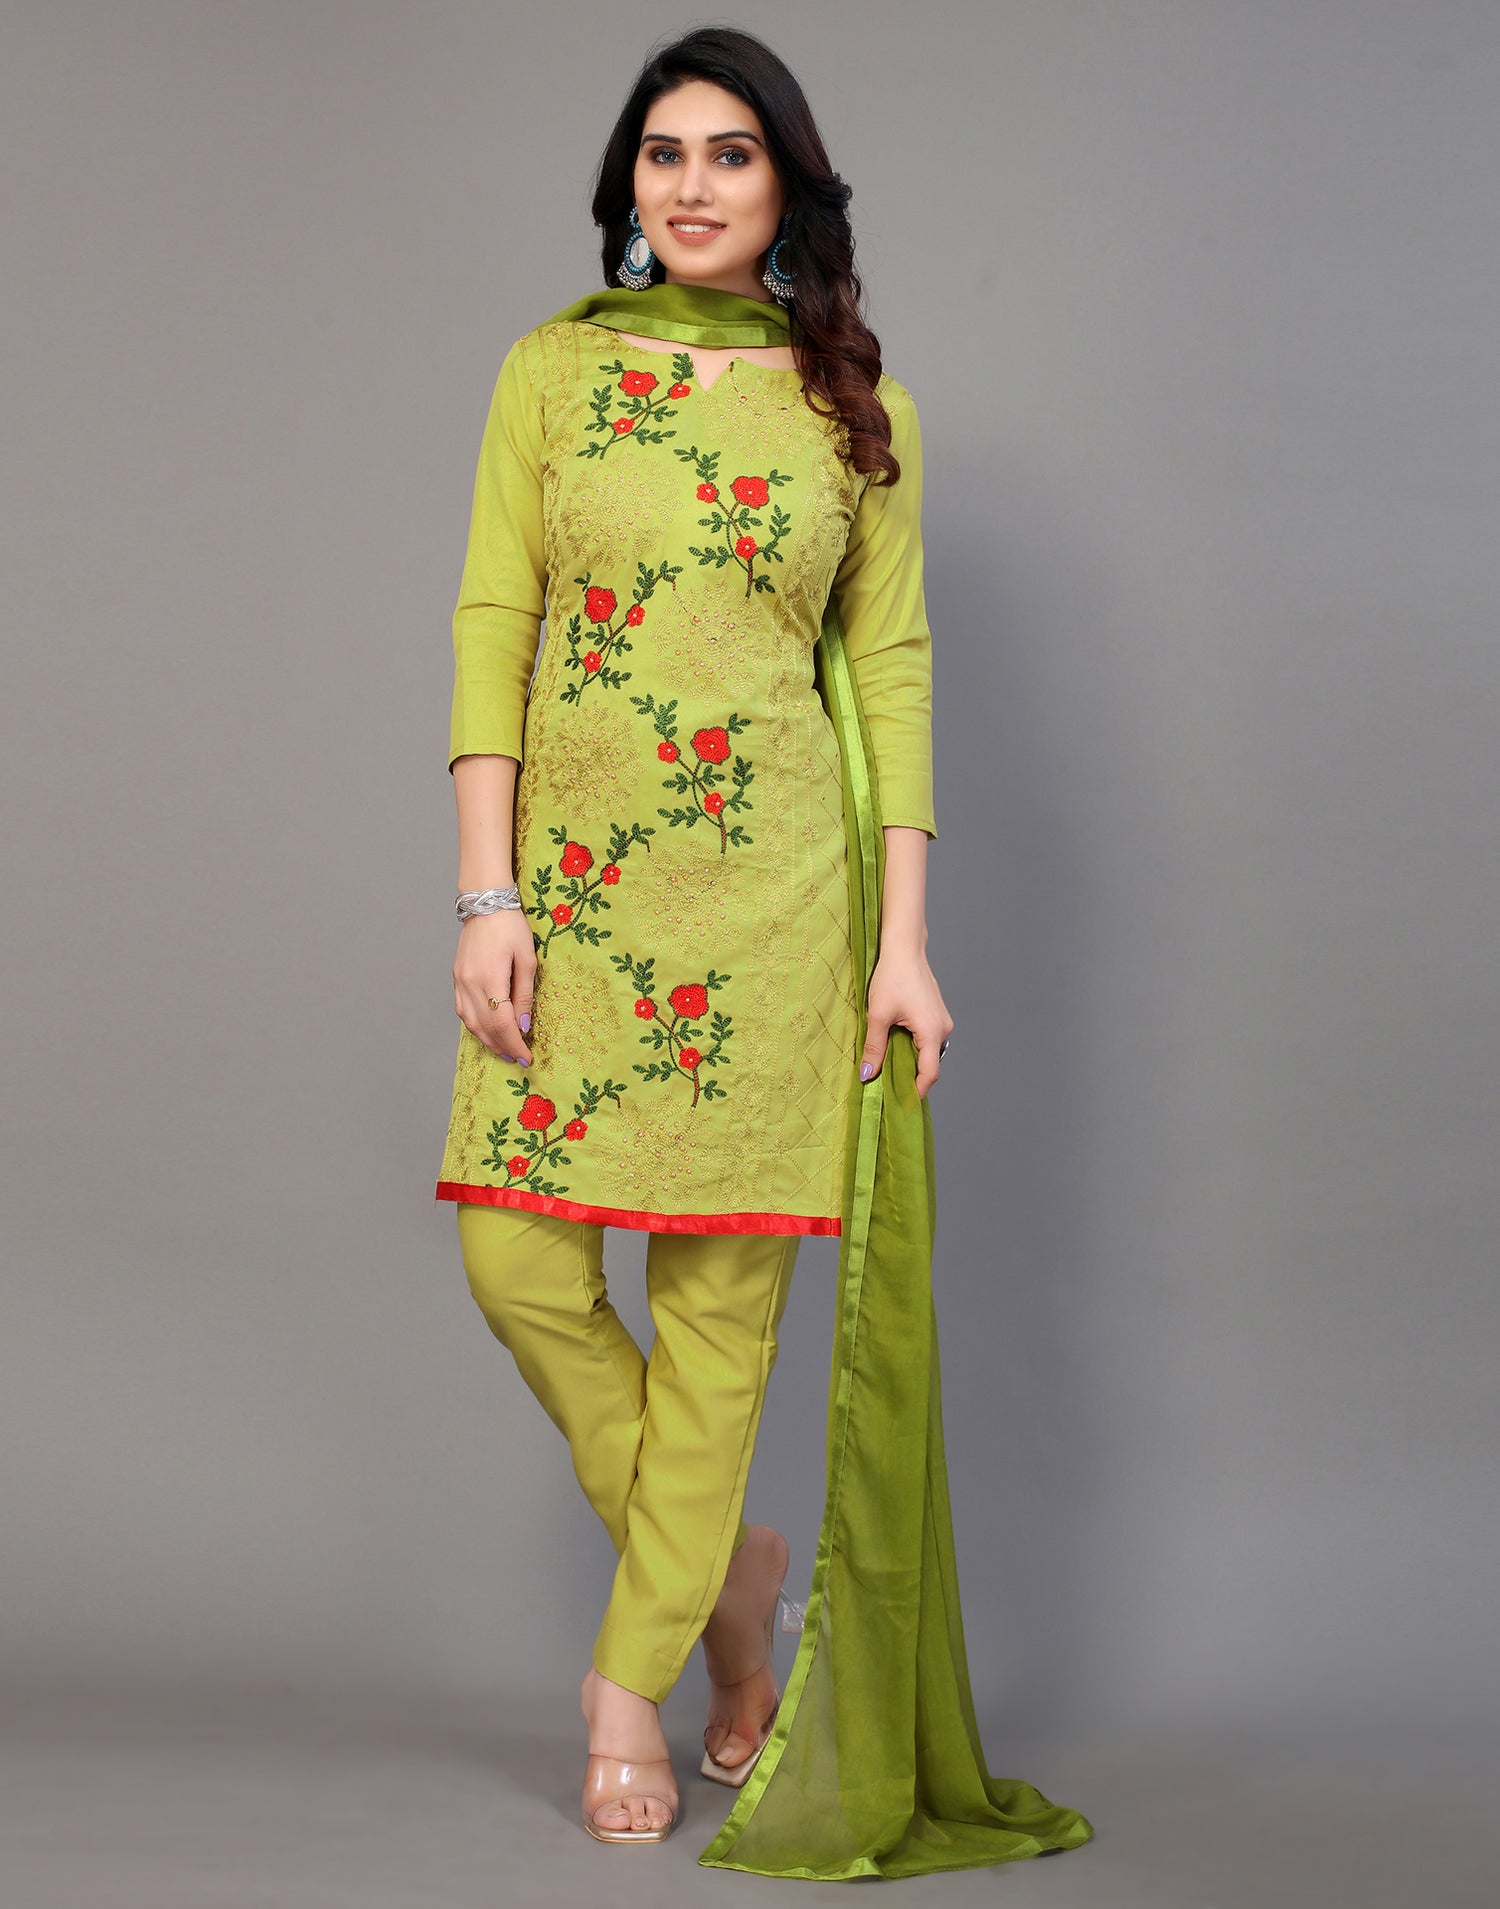 Embroidery Cotton Blend Unstitched Salwar Suit Material | Leemboodi